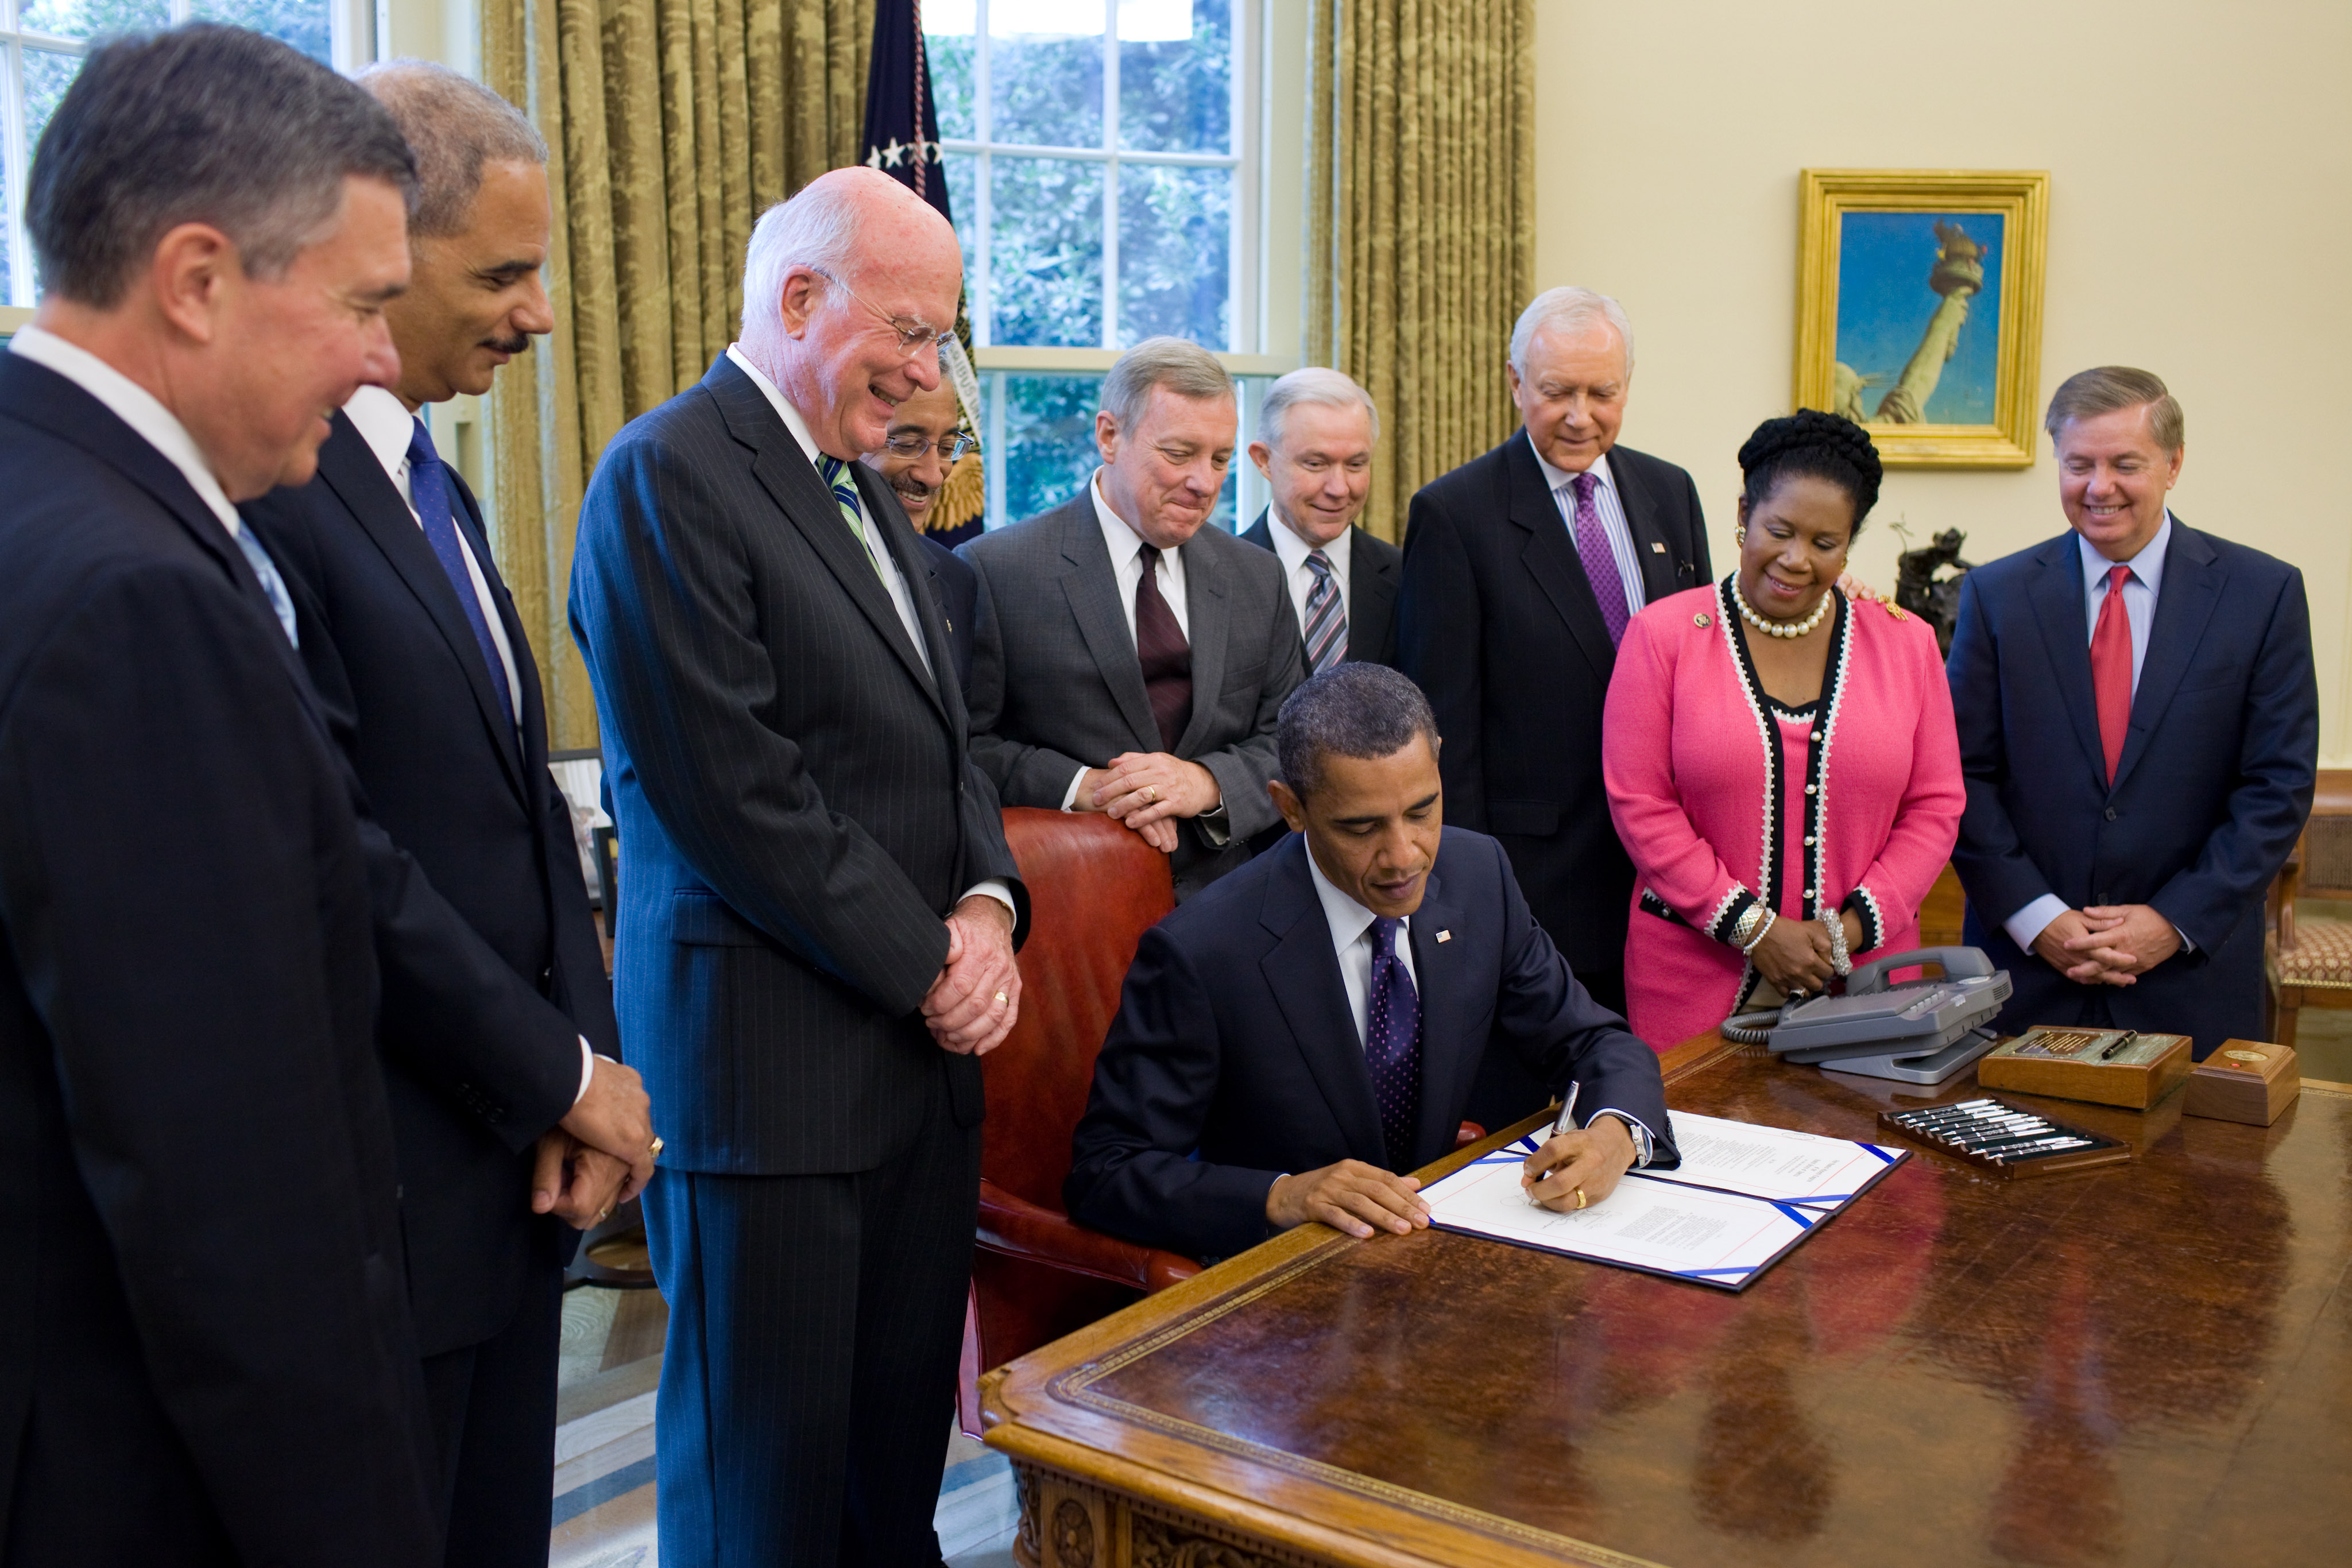 President Barack Obama Signs the Fair Sentencing Act in the Oval Office